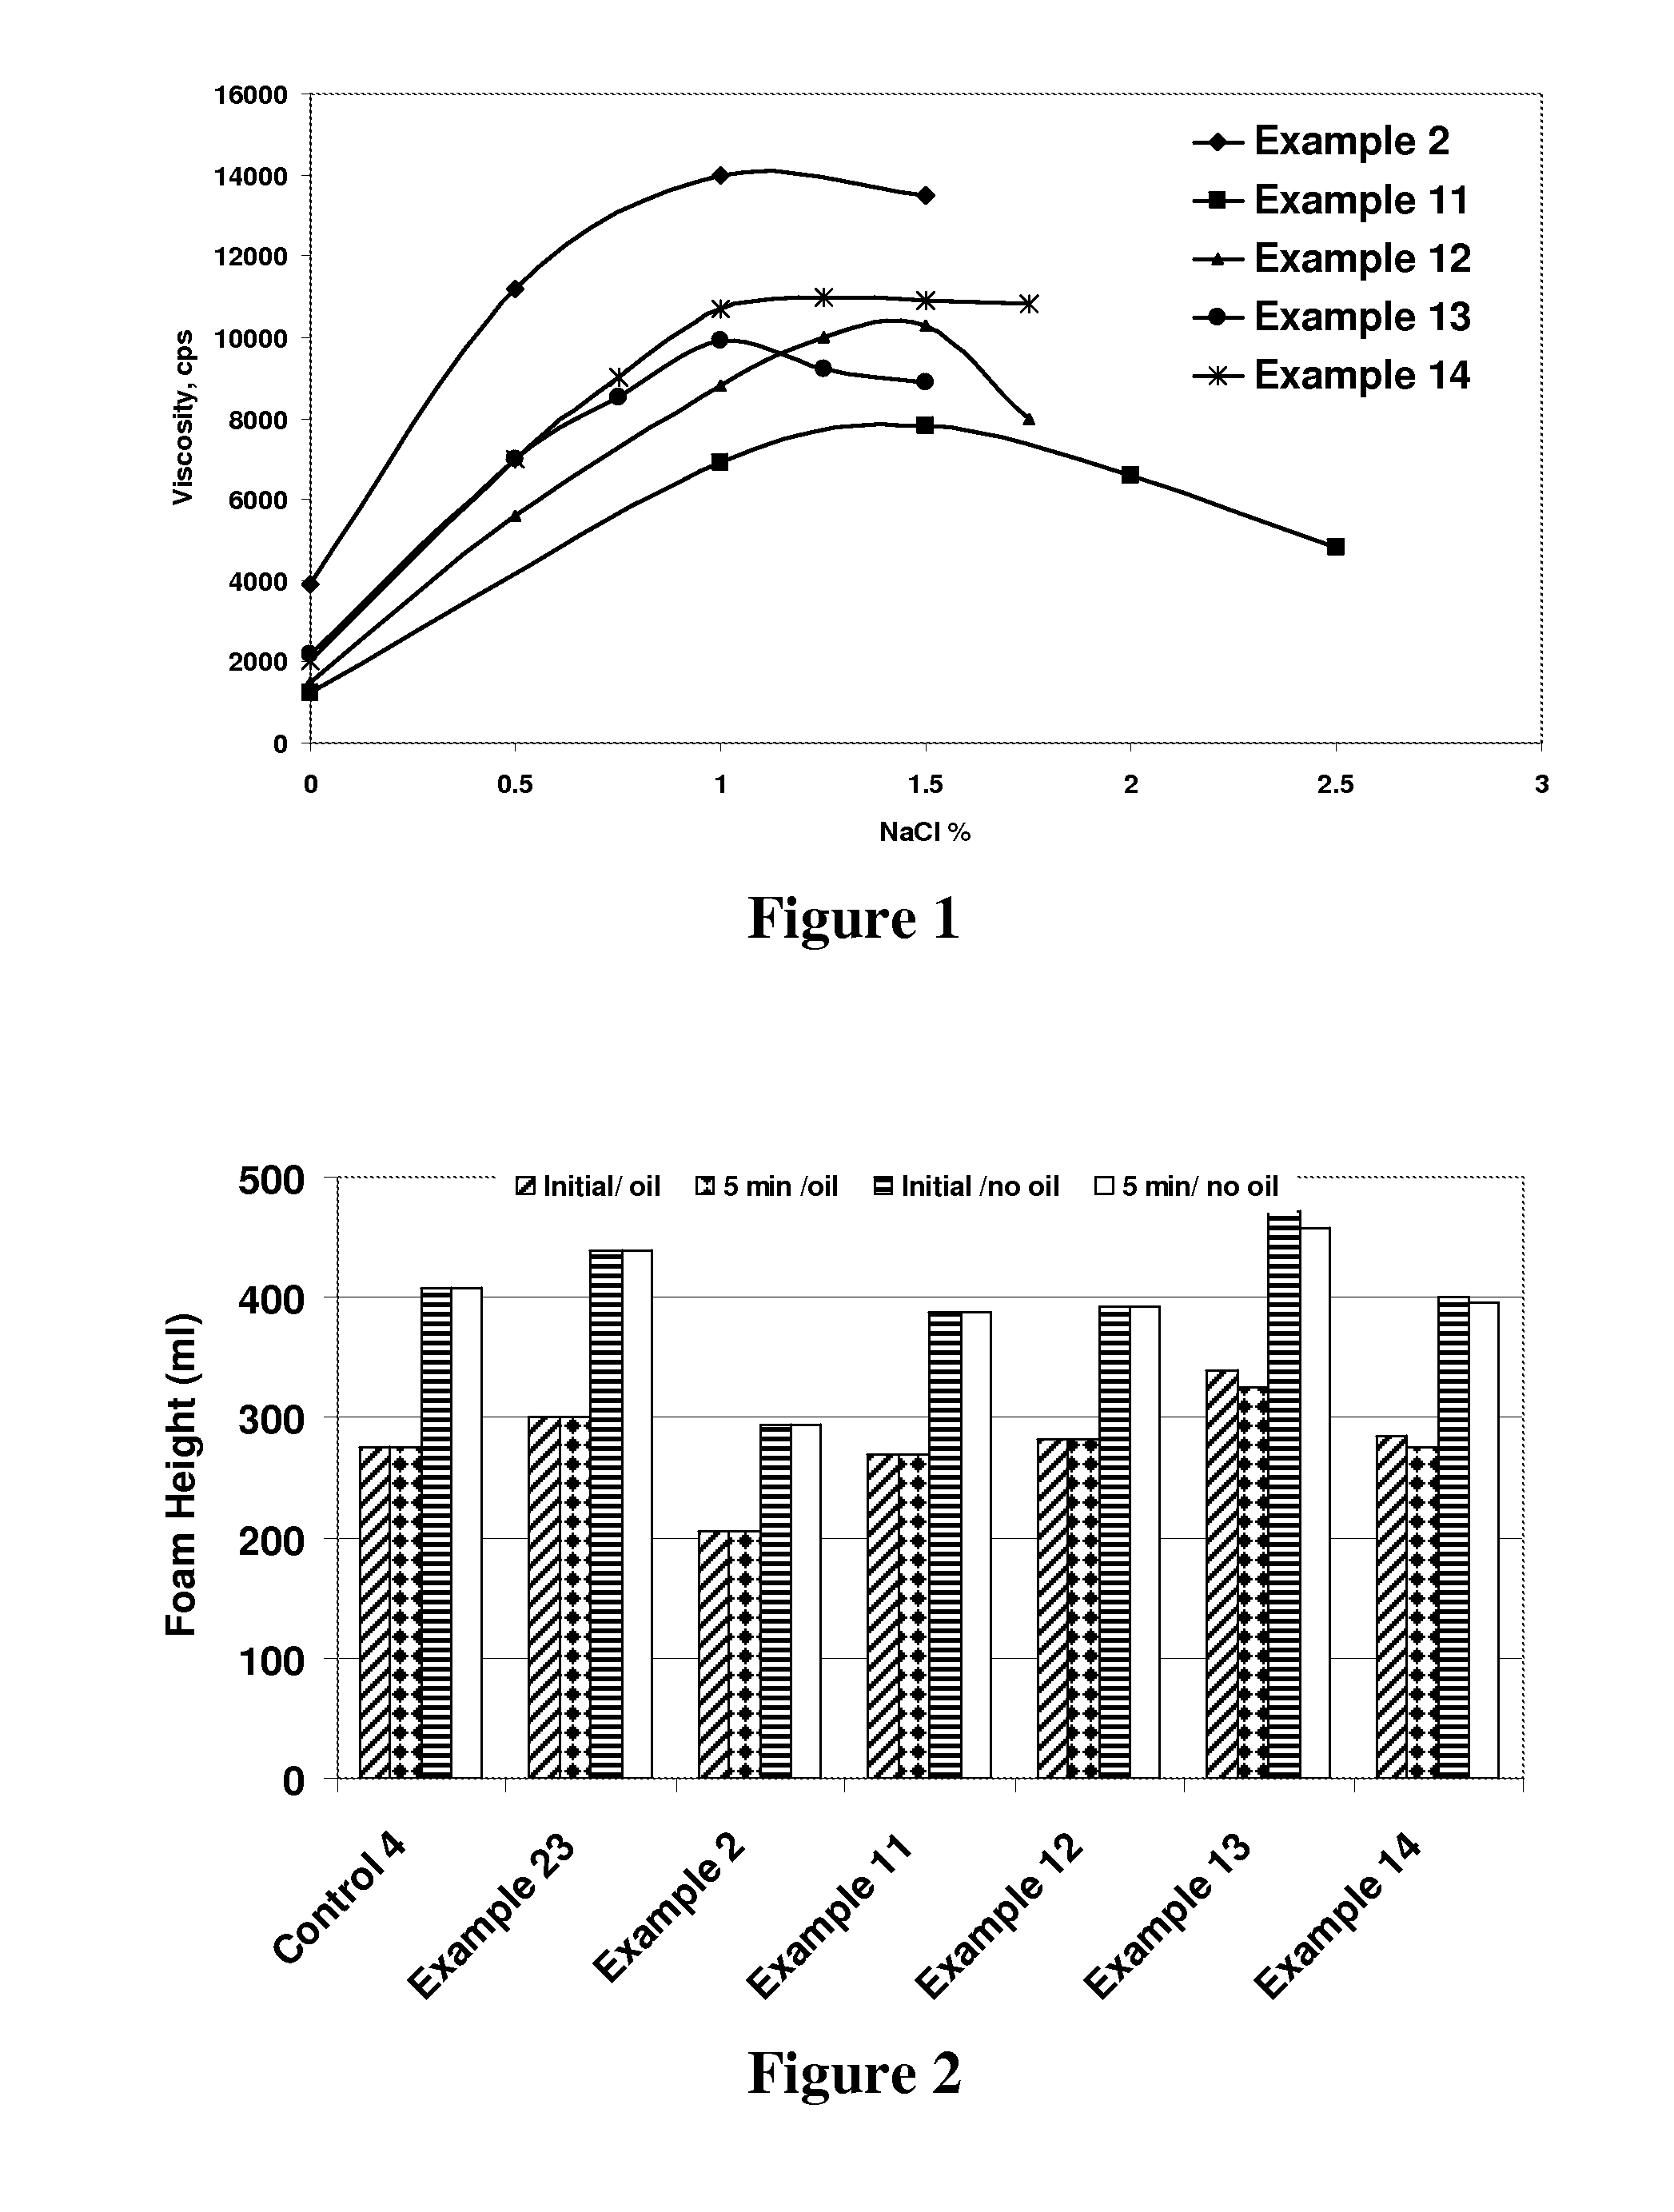 Viscous Liquid Cleansing Compositions Comprising Sulfonated Fatty Acids, Esters, or Salts Thereof and Betaines or Sultaines